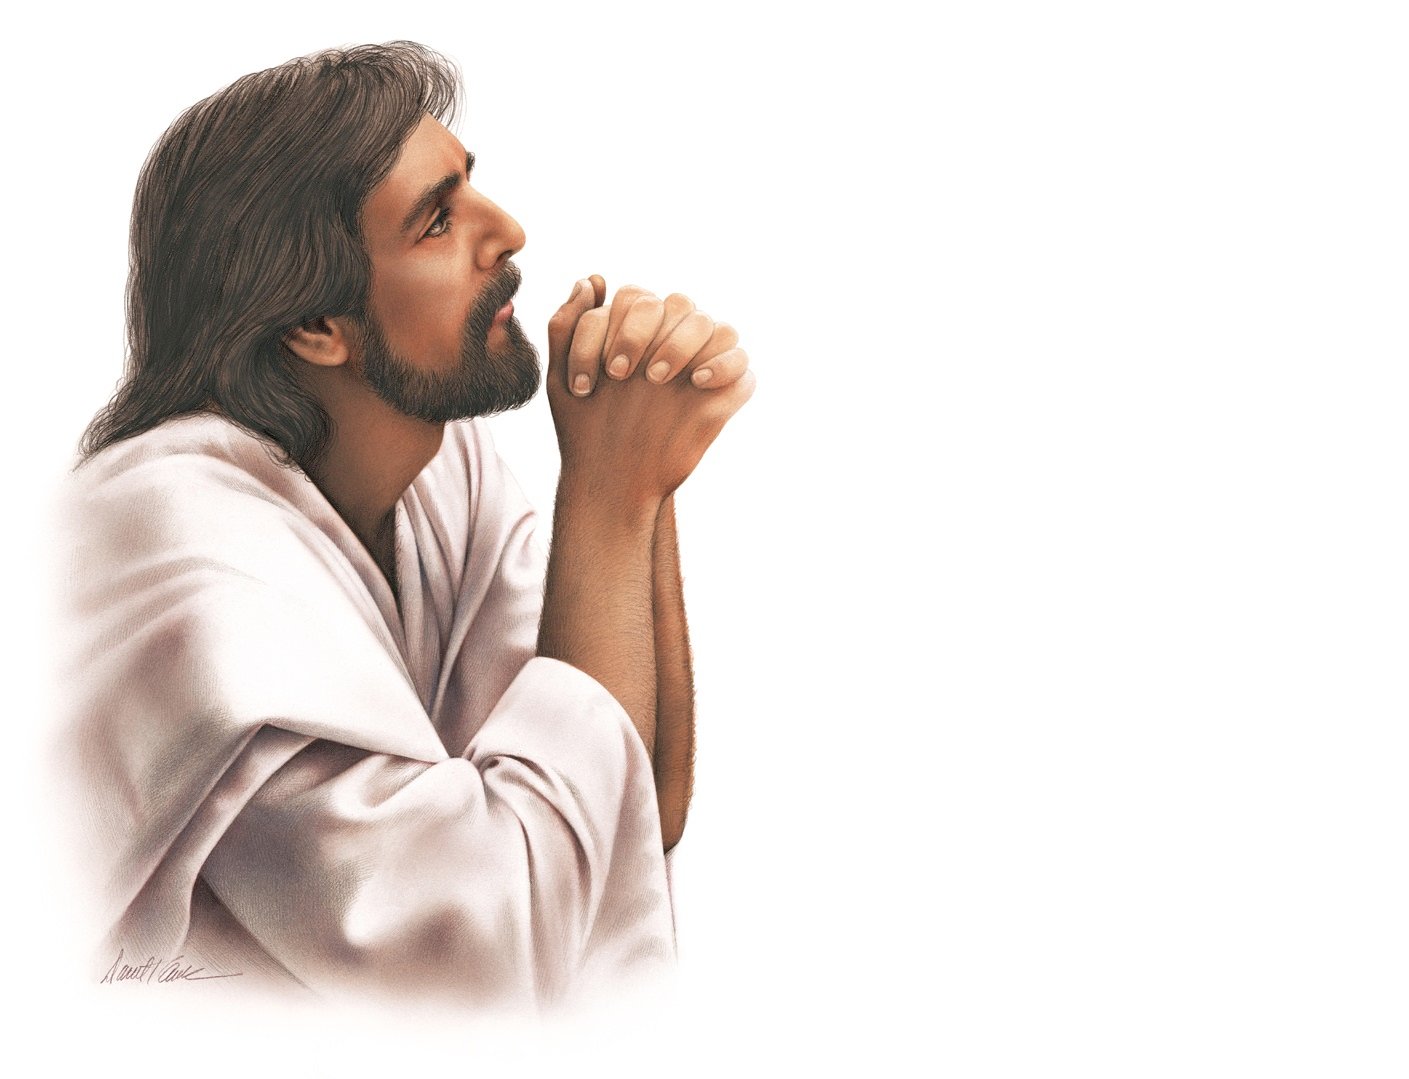 87900 Jesus Praying Stock Photos Pictures  RoyaltyFree Images  iStock   Jesus praying hands Jesus praying in garden Jesus praying stained glass